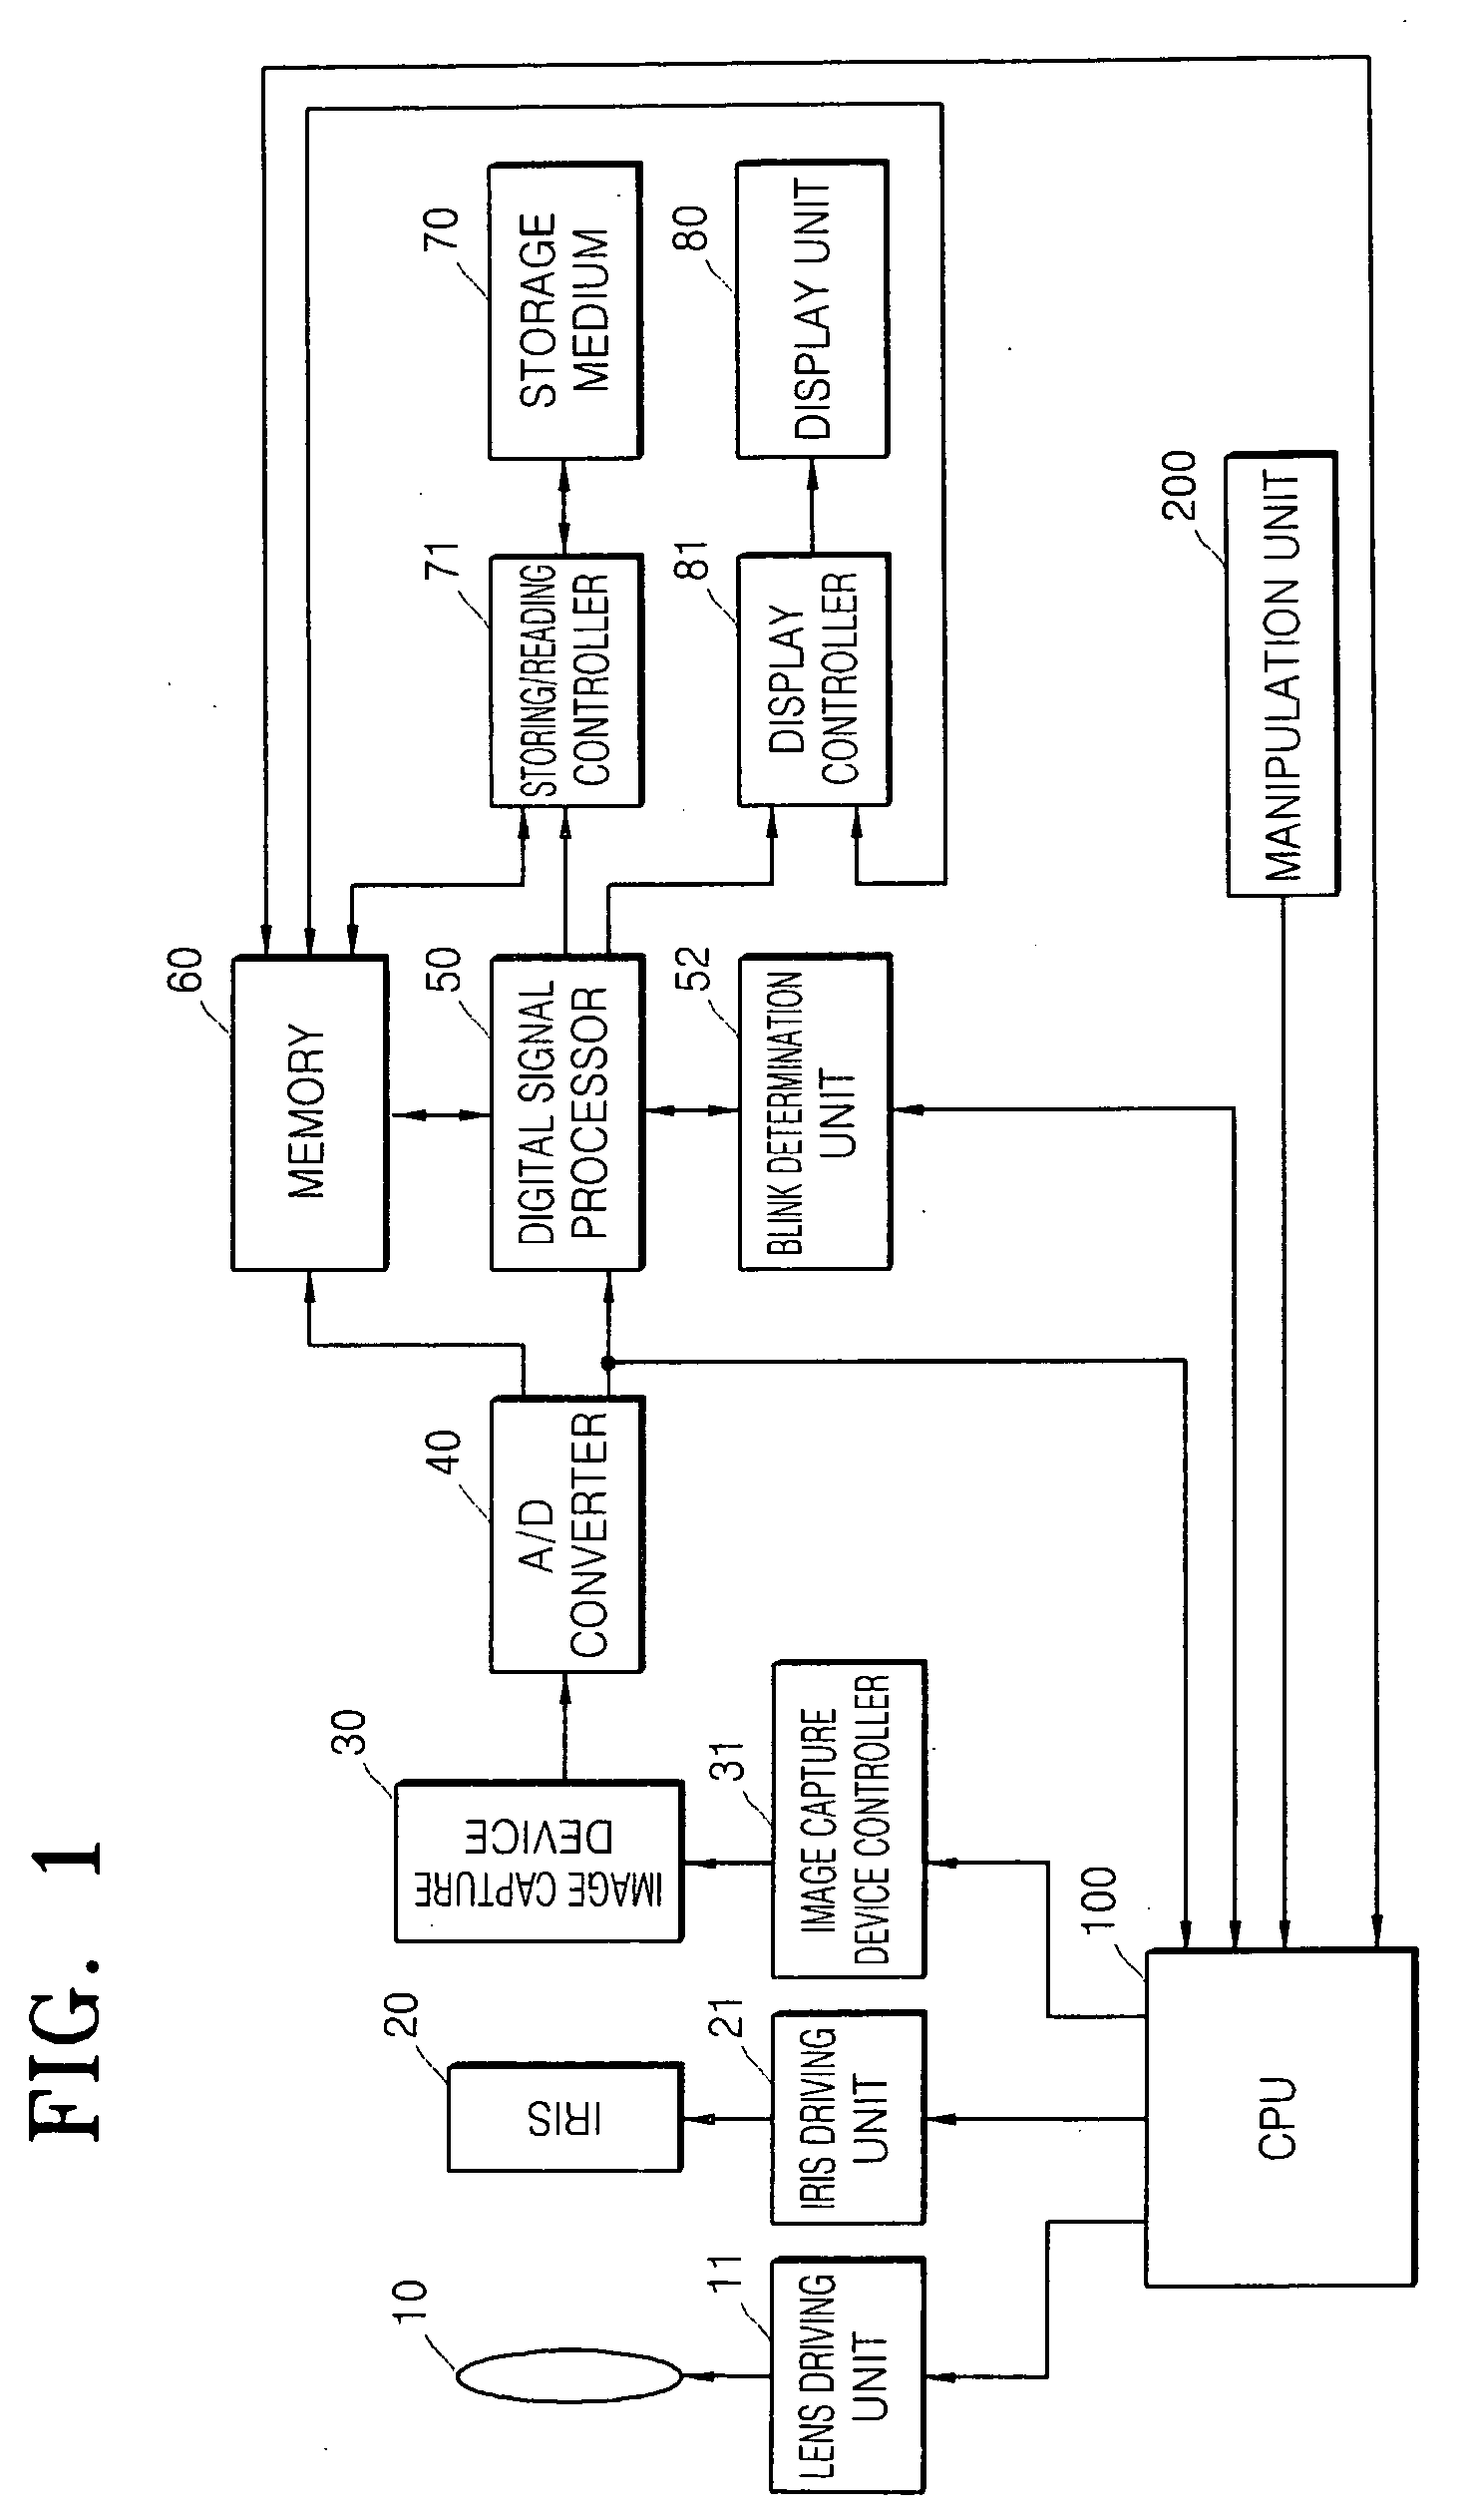 Digital photographing apparatus, method of controlling the apparatus, and recording medium having recorded thereon program for executing the method